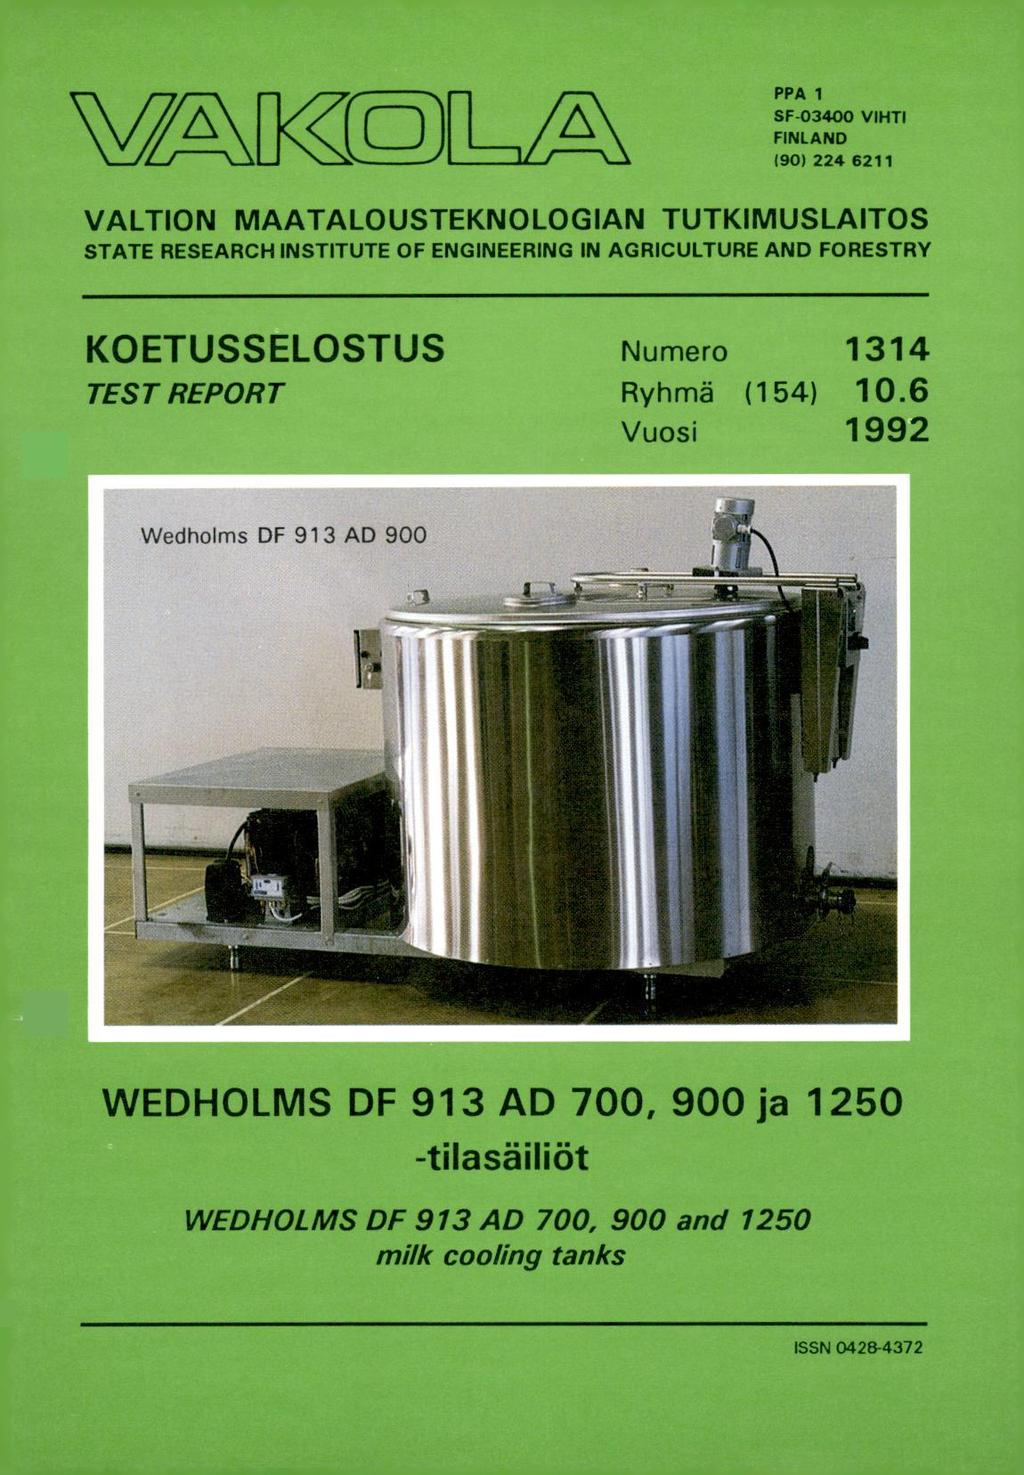 V/AK PPA 1 SF 03400 VIHTI FINLAND (90) 224 6211 VALTION MAATALOUSTEKNOLOGIAN TUTKIMUSLAITOS STATE RESEARCH INSTITUTE OF ENGINEERING IN AGRICULTURE AND FORESTRY KOETUSSELOSTUS